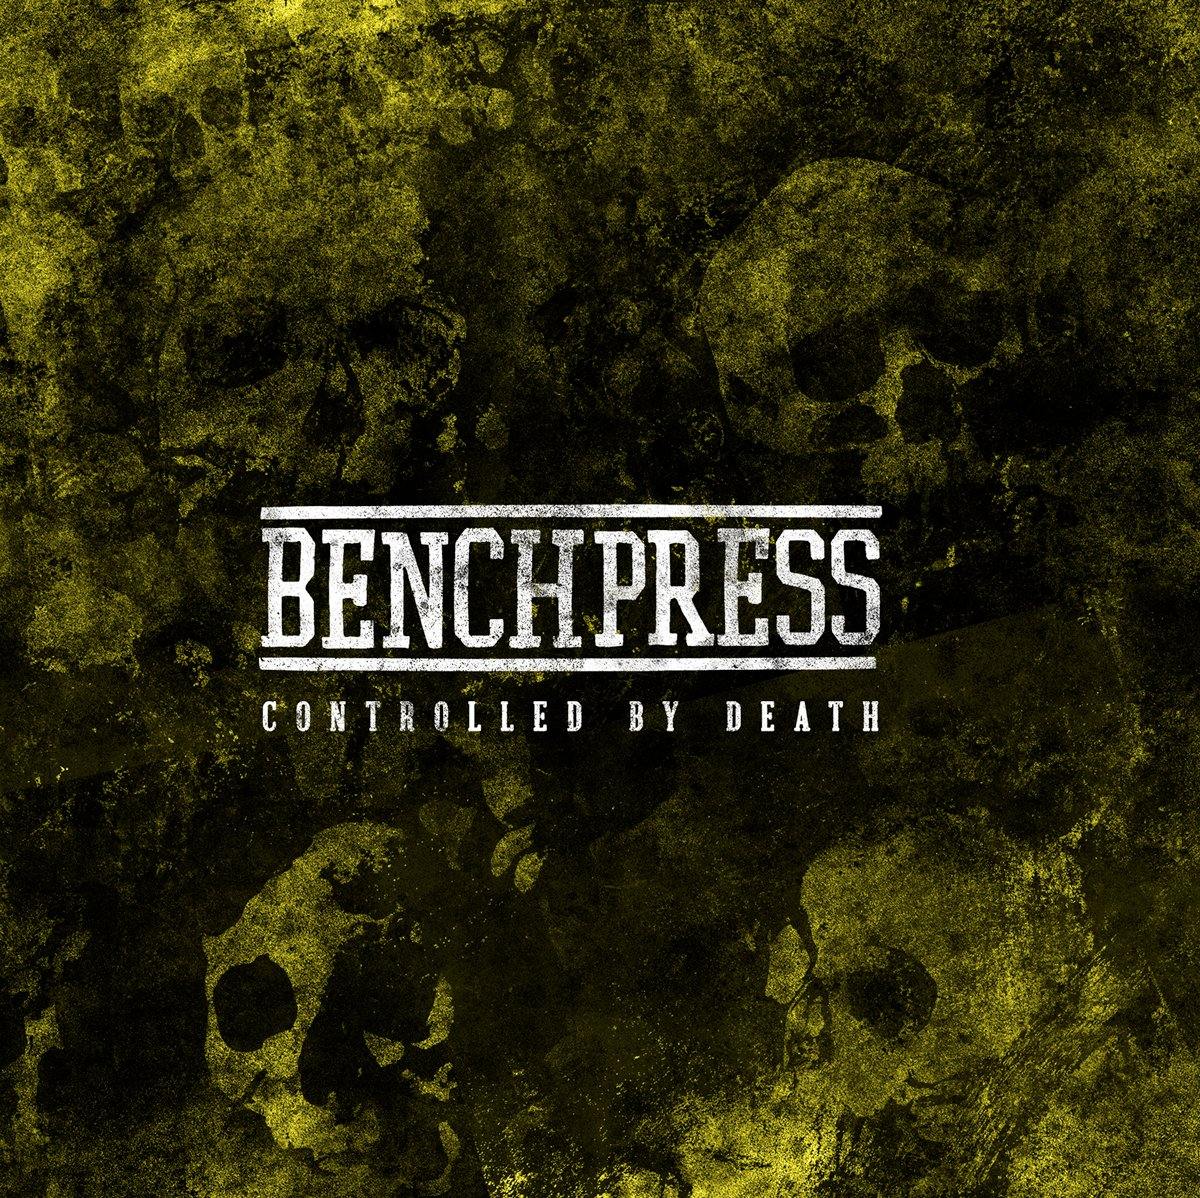 Buy – Benchpress "Controlled By Death" 12" – Band & Music Merch – Cold Cuts Merch